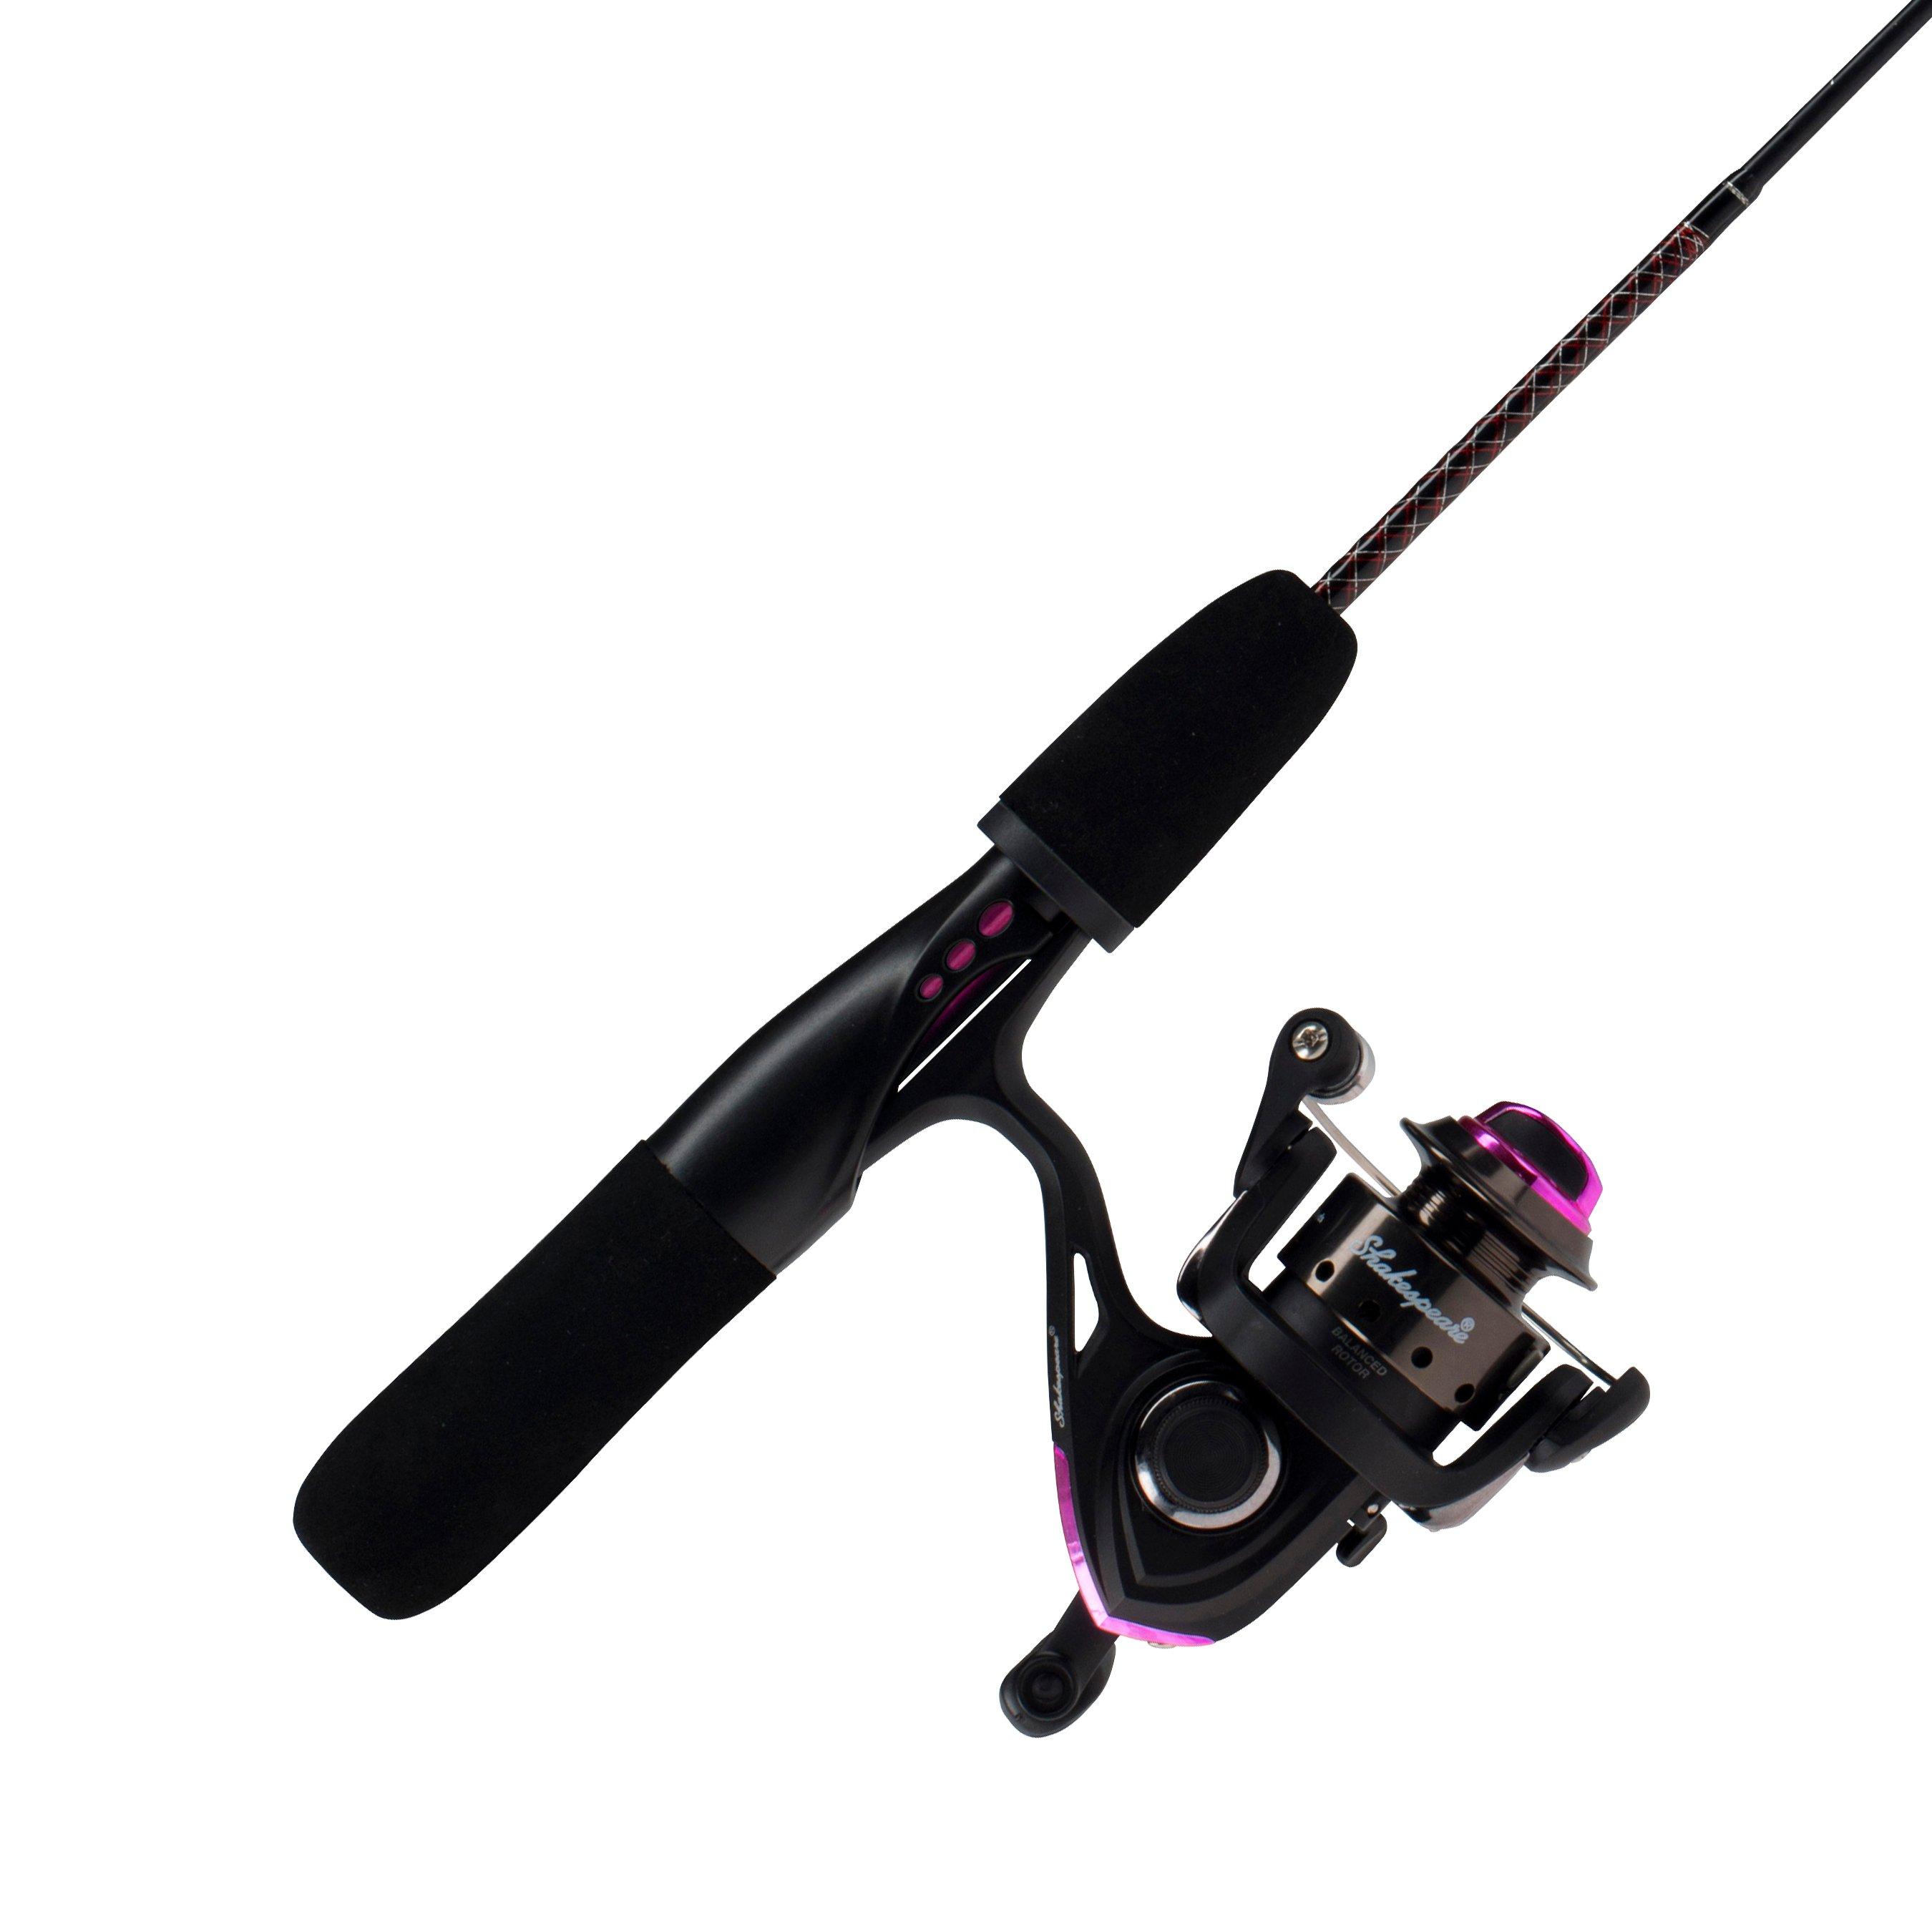 Ugly Stik 4'8” GX2 Spinning Fishing Rod and Reel Spinning Combo, Ugly Tech  Construction with Clear Tip Design, 4'8” 1-Piece Rod, BLK, 20 Size Reel -  4'8 - Ultra Light - 1pc